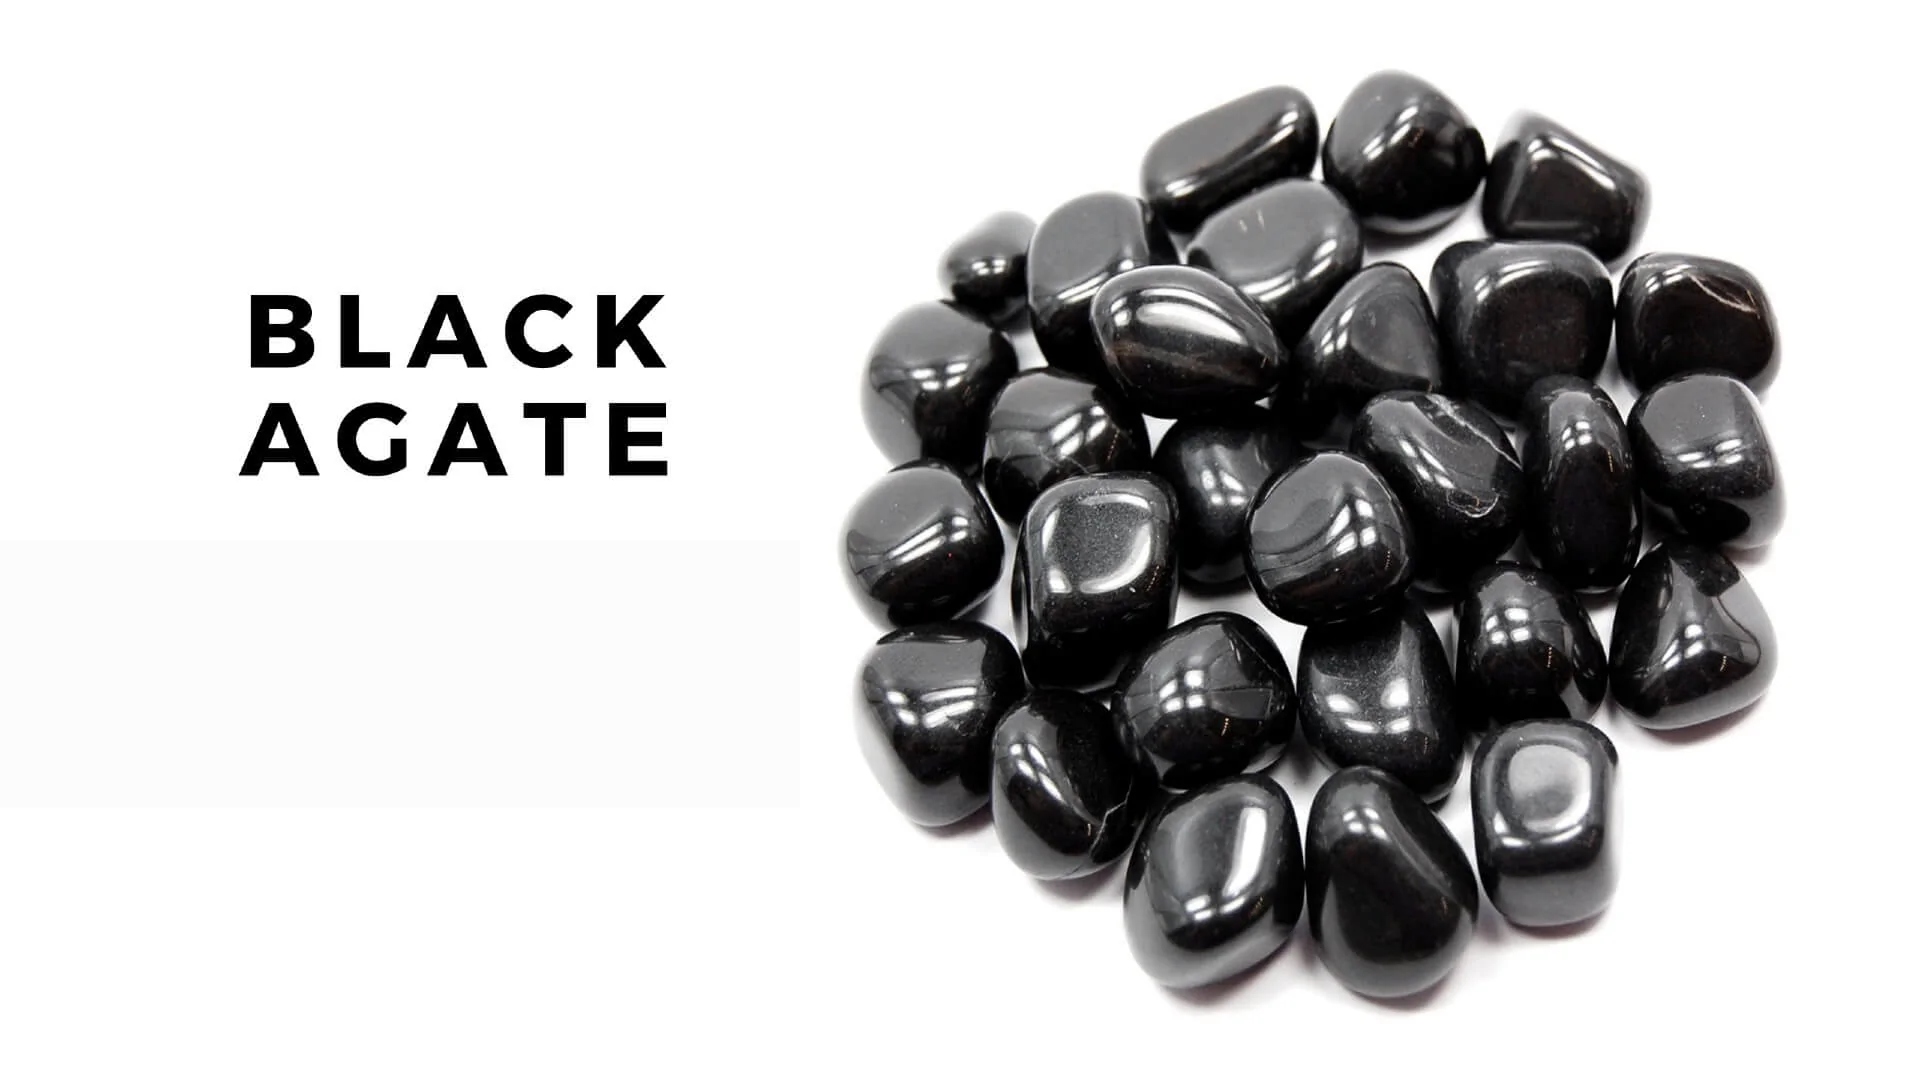 Black Agate Spiritual Properties - How Does It Help You?